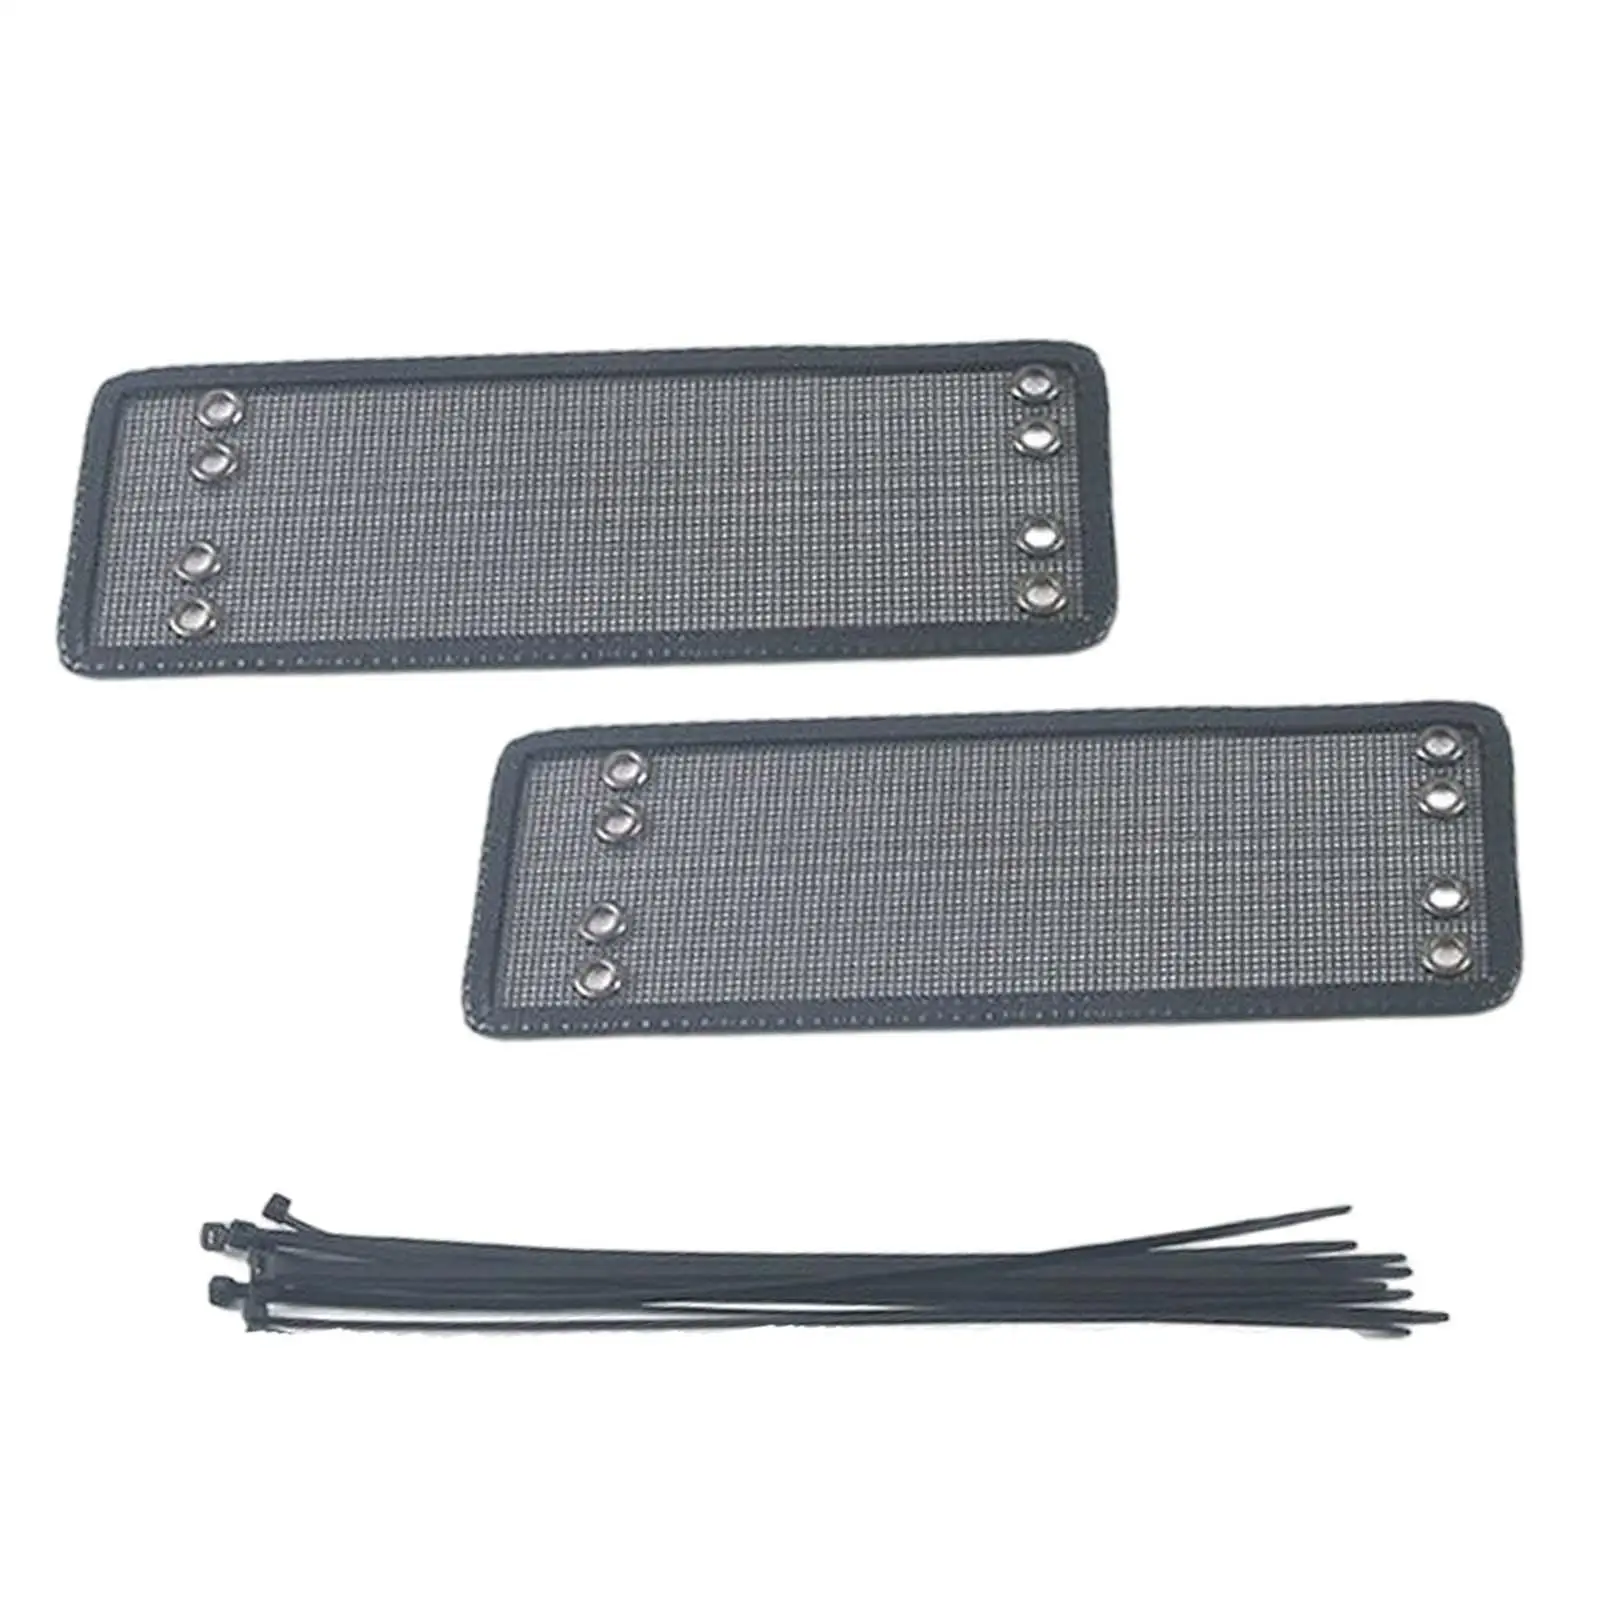 Front Grille Mesh Stainless Steel Exterior Parts for Byd Atto 3 21 Accessories High Performance Replaces Durable